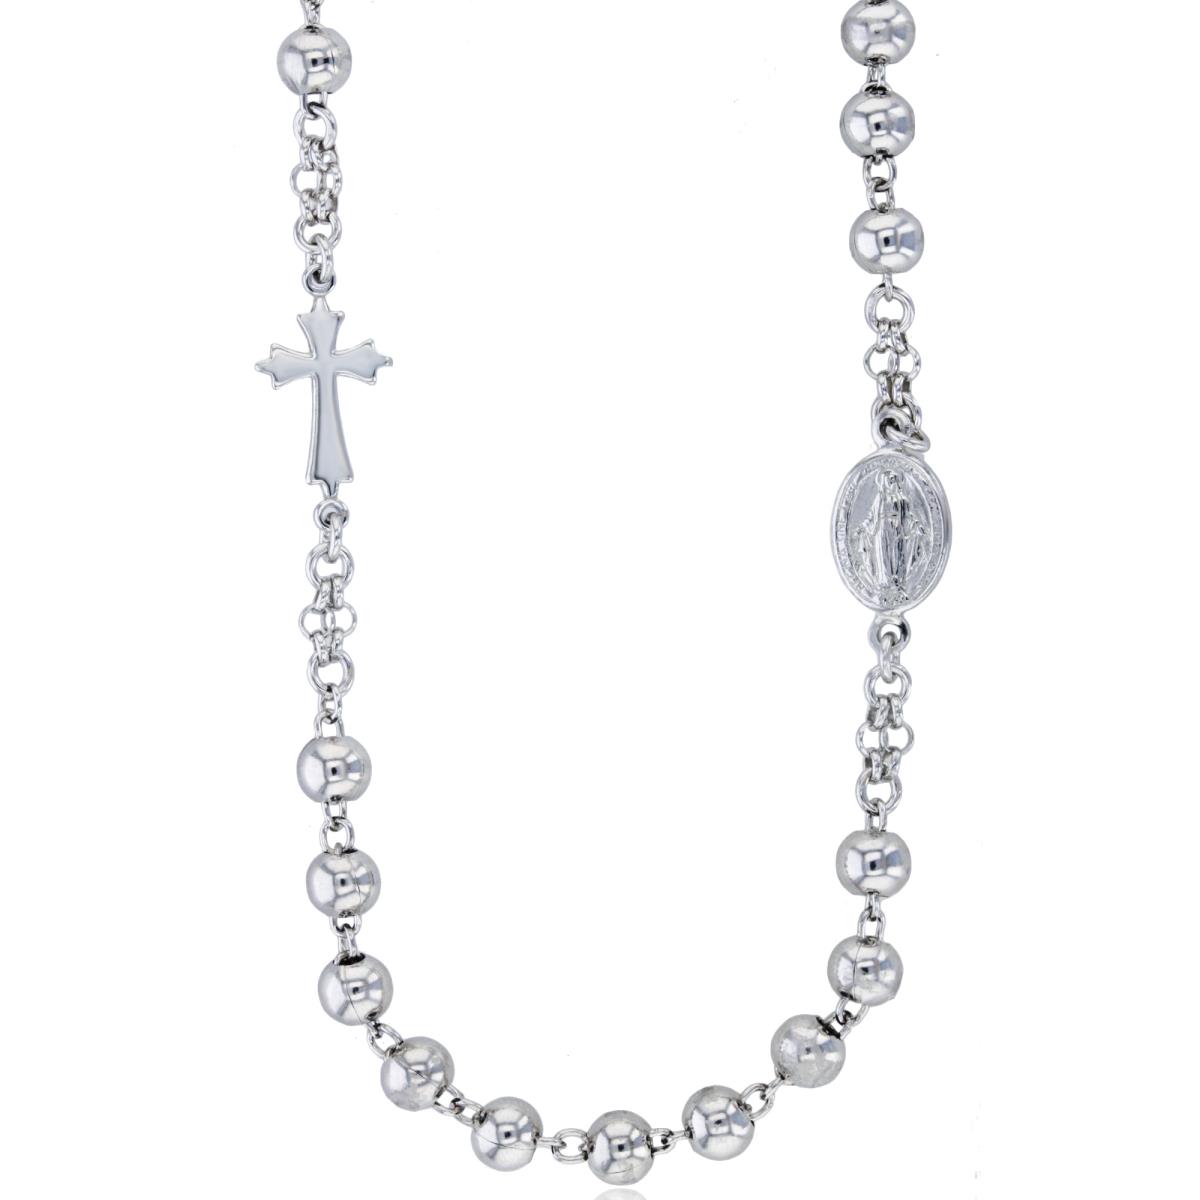 Sterling Silver Rhodium 5mm Beads Cross & Virgin Mary 20" Rosary Necklace